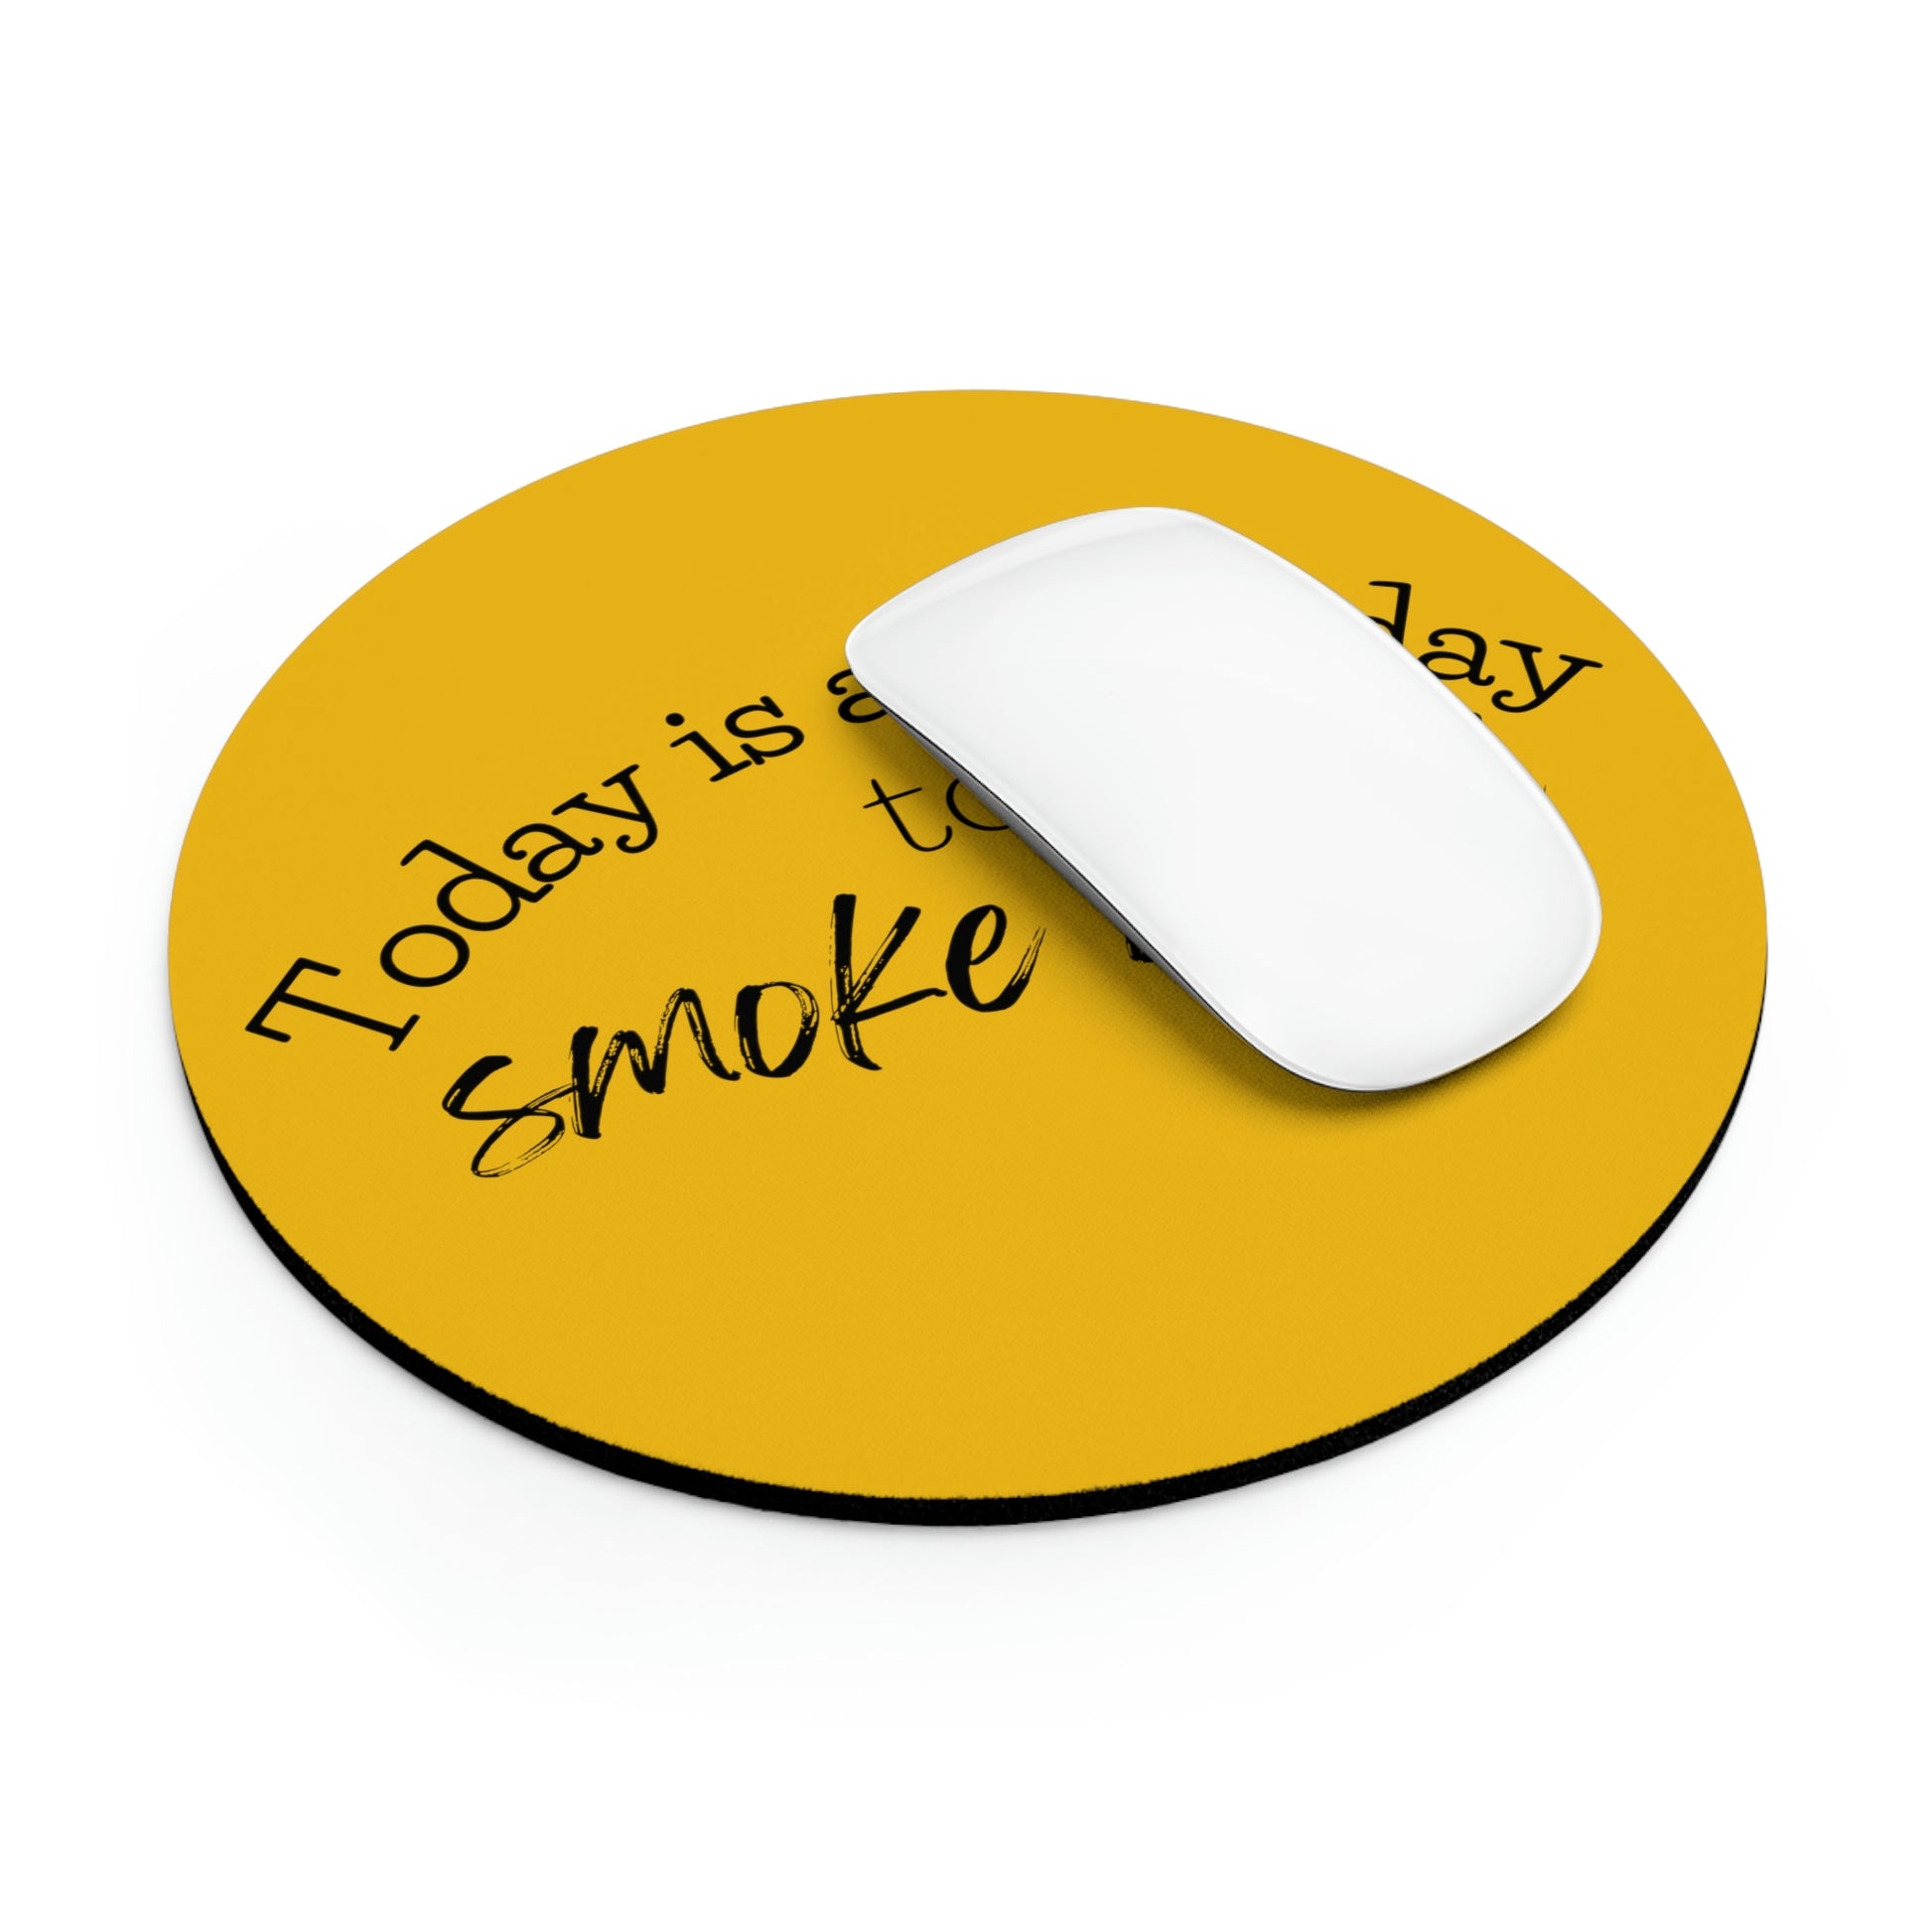 A white computer mouse resting on a Today is a Good Day to Smoke Weed Yellow Mouse Pad with the text "today is the day to stop smoke.